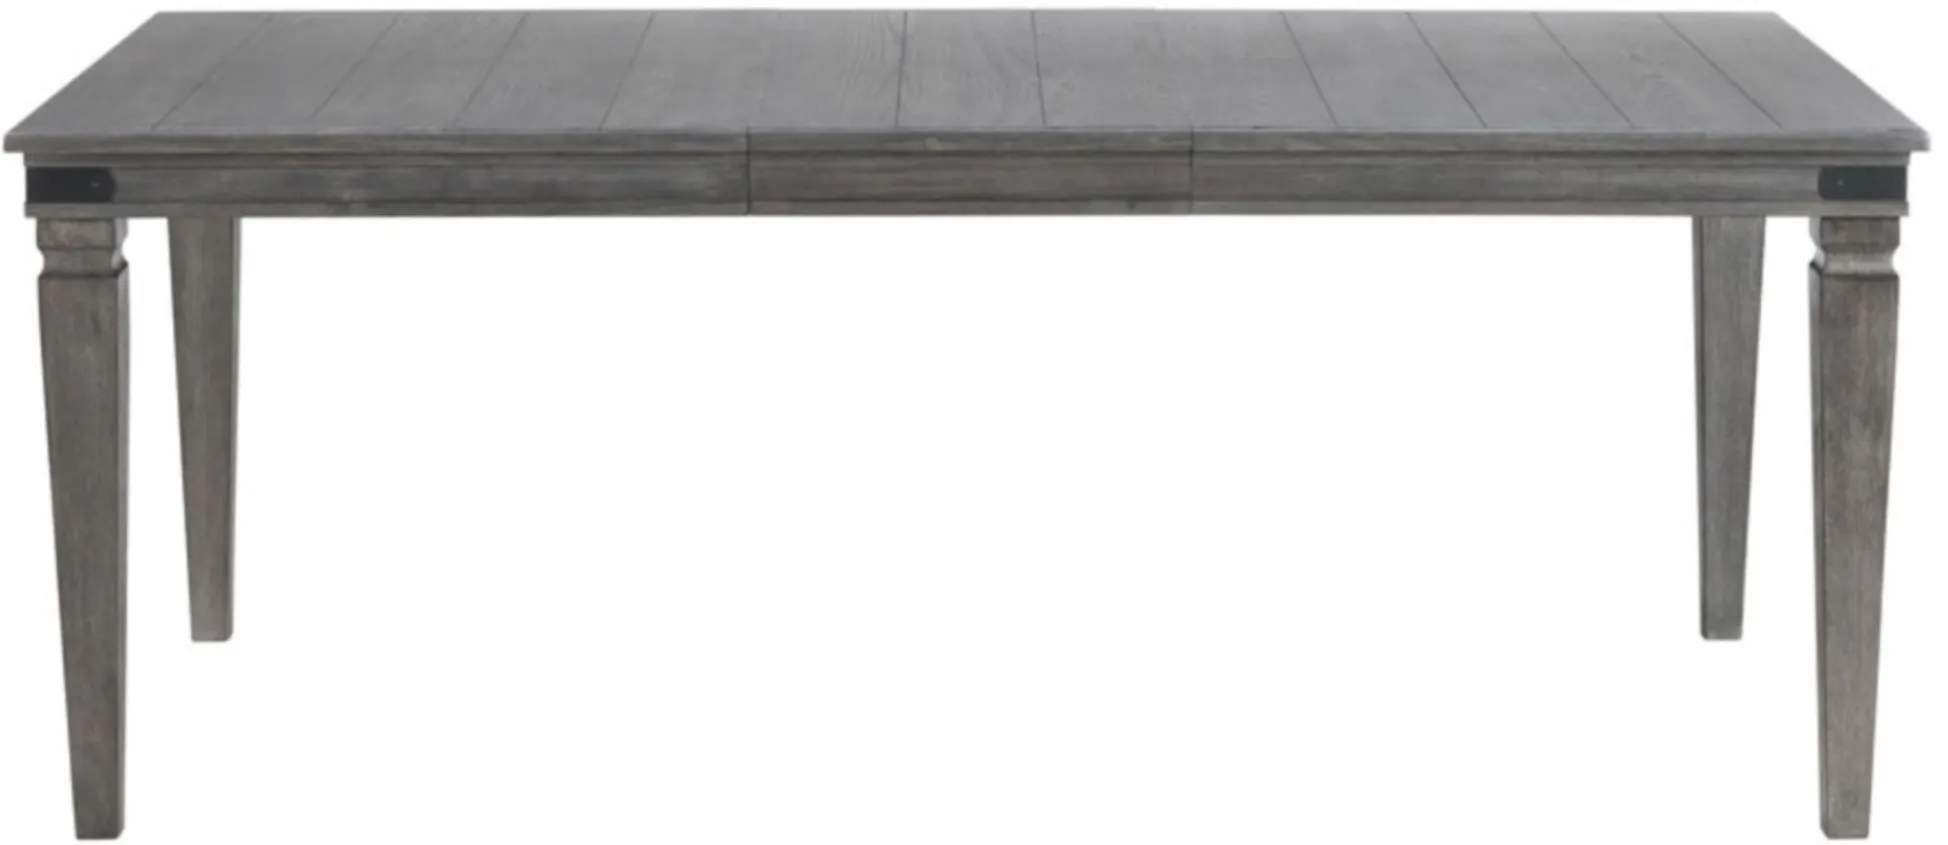 Foundry Dining Table in Brushed Pewter by Intercon